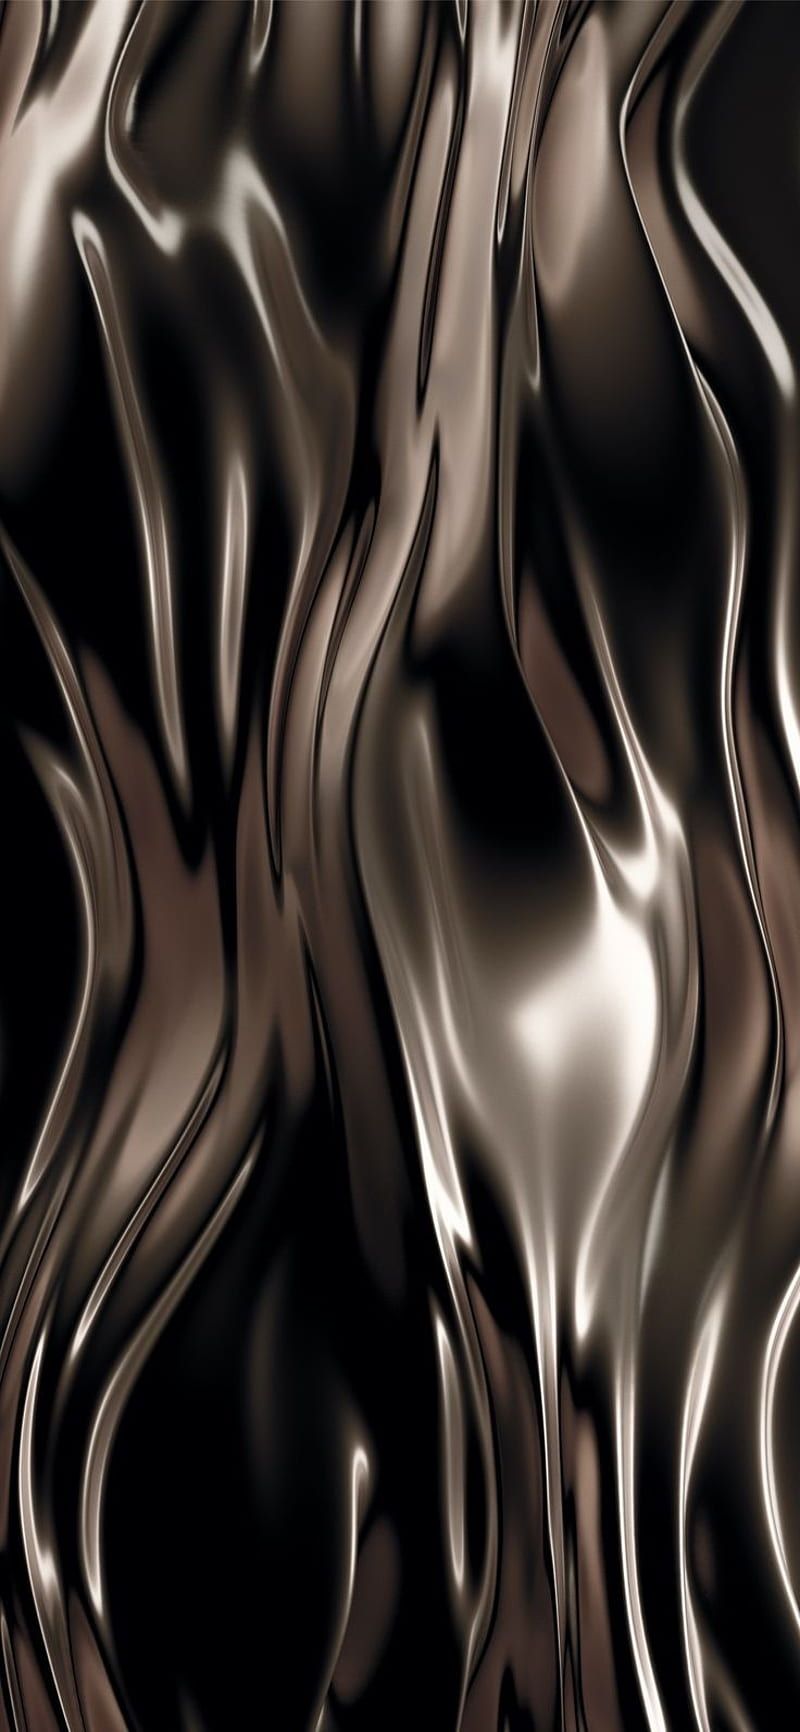 A dark abstract background image with flowing liquid metal. - Silk